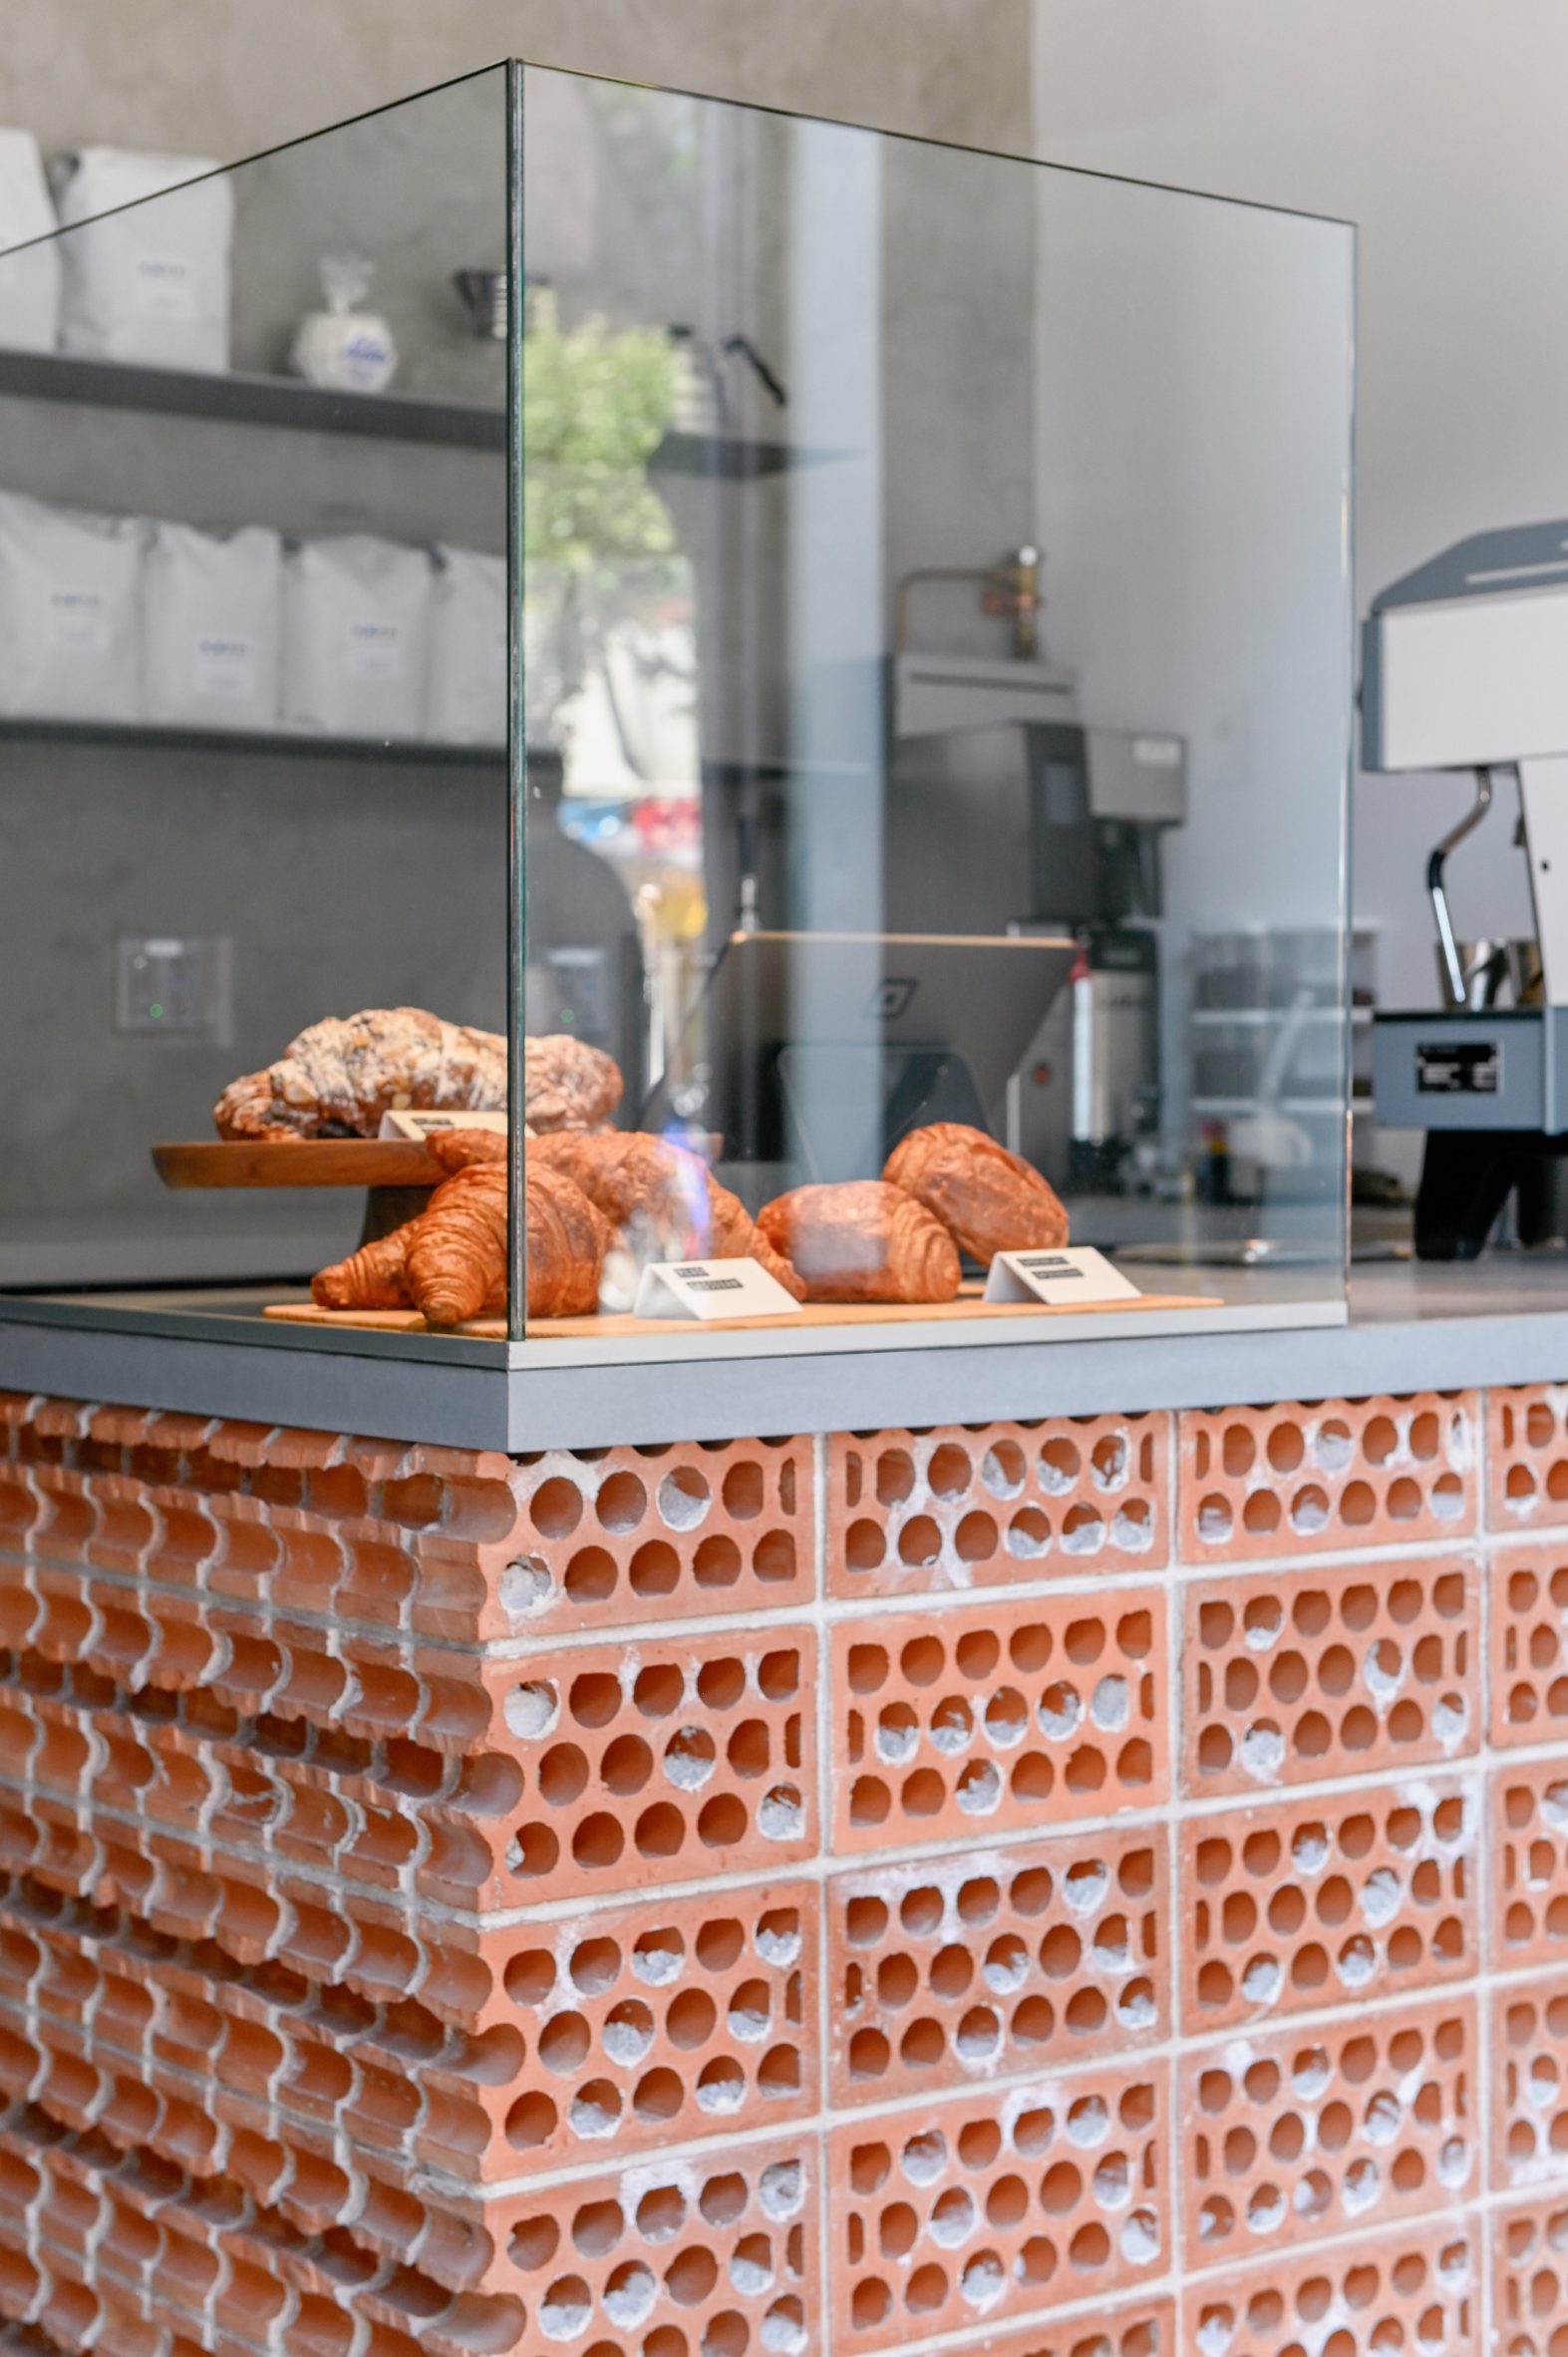 A counter terminated by a course of cut bricks, with a glass enclosure for pastries on top